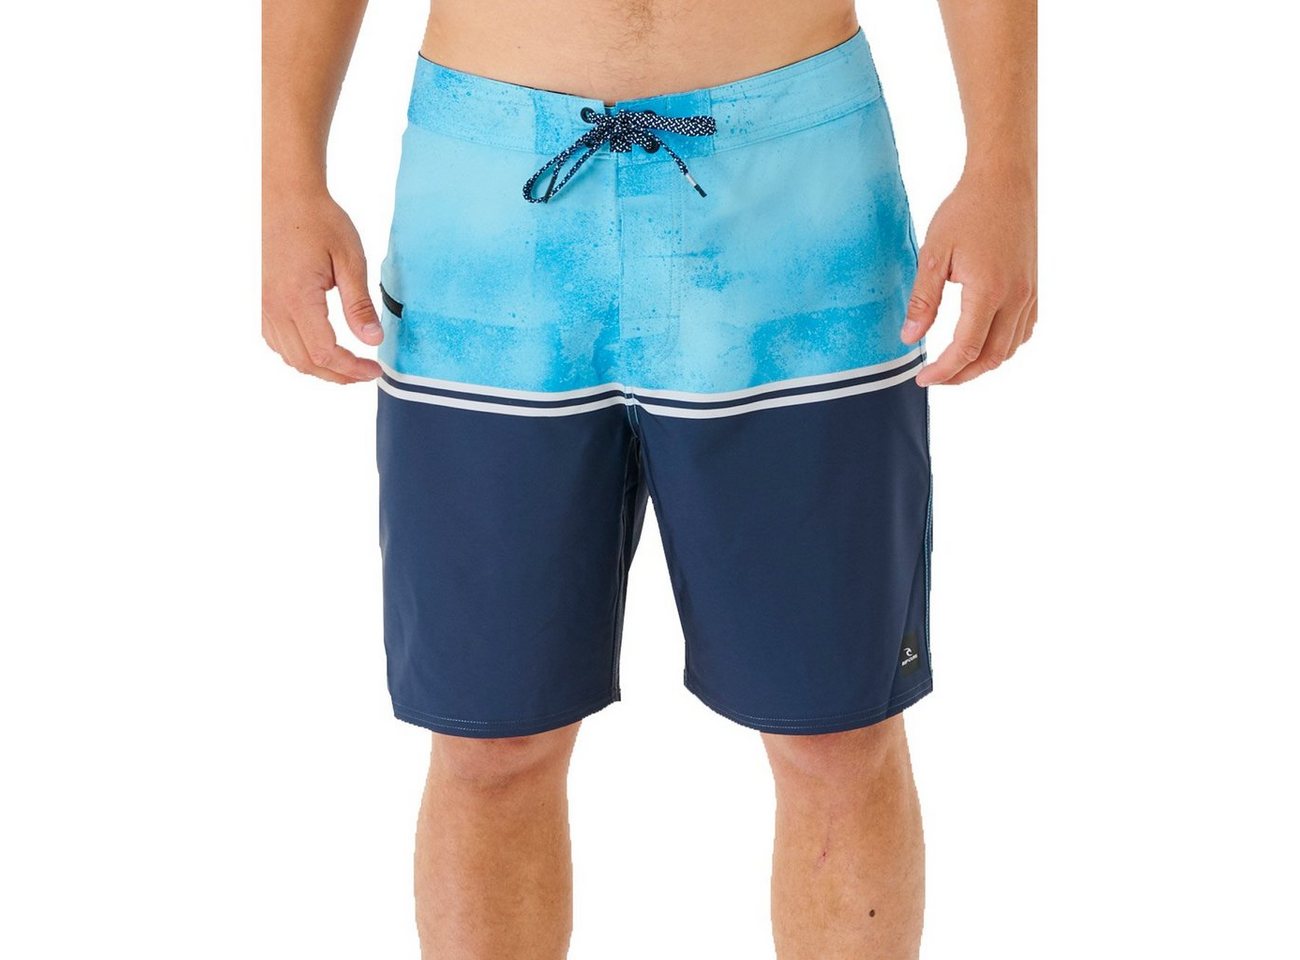 Rip Curl Badeshorts MIRAGE COMBINED von Rip Curl